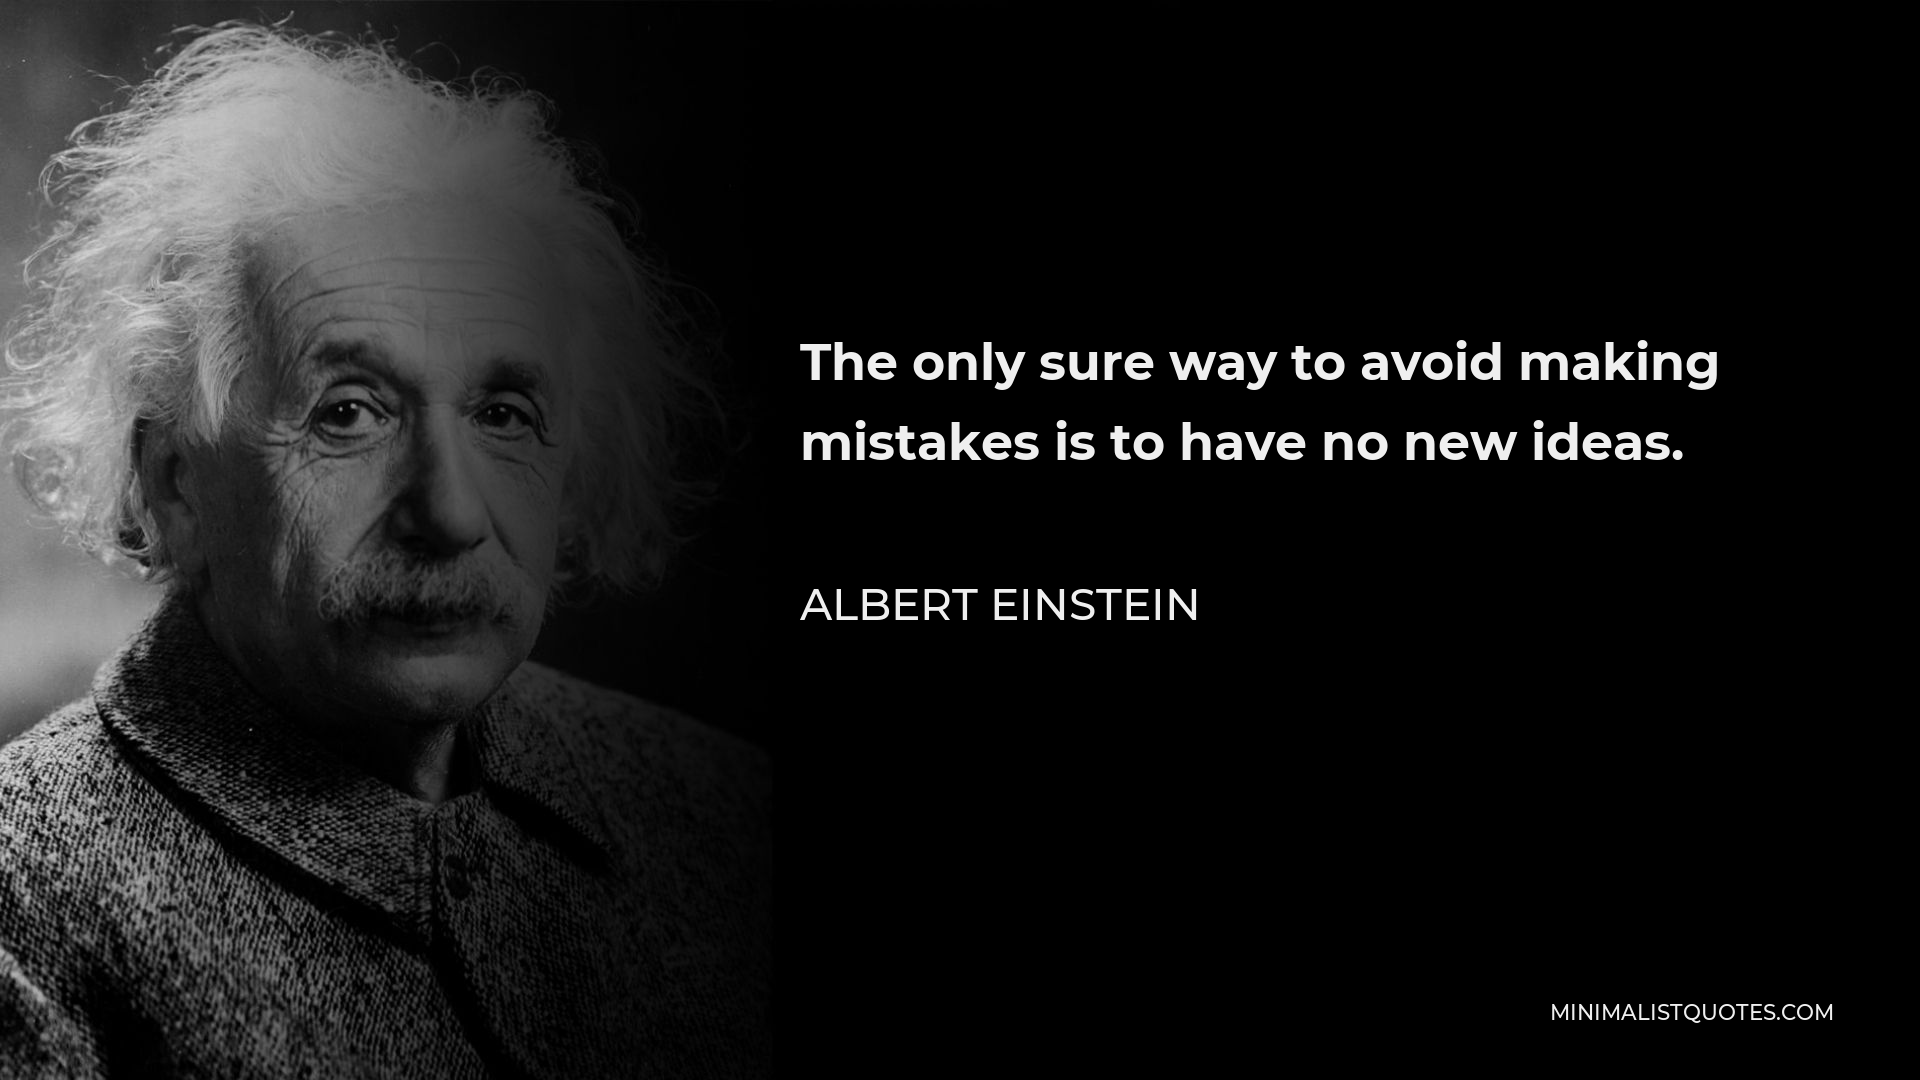 Albert Einstein Quote - The only sure way to avoid making mistakes is to have no new ideas.